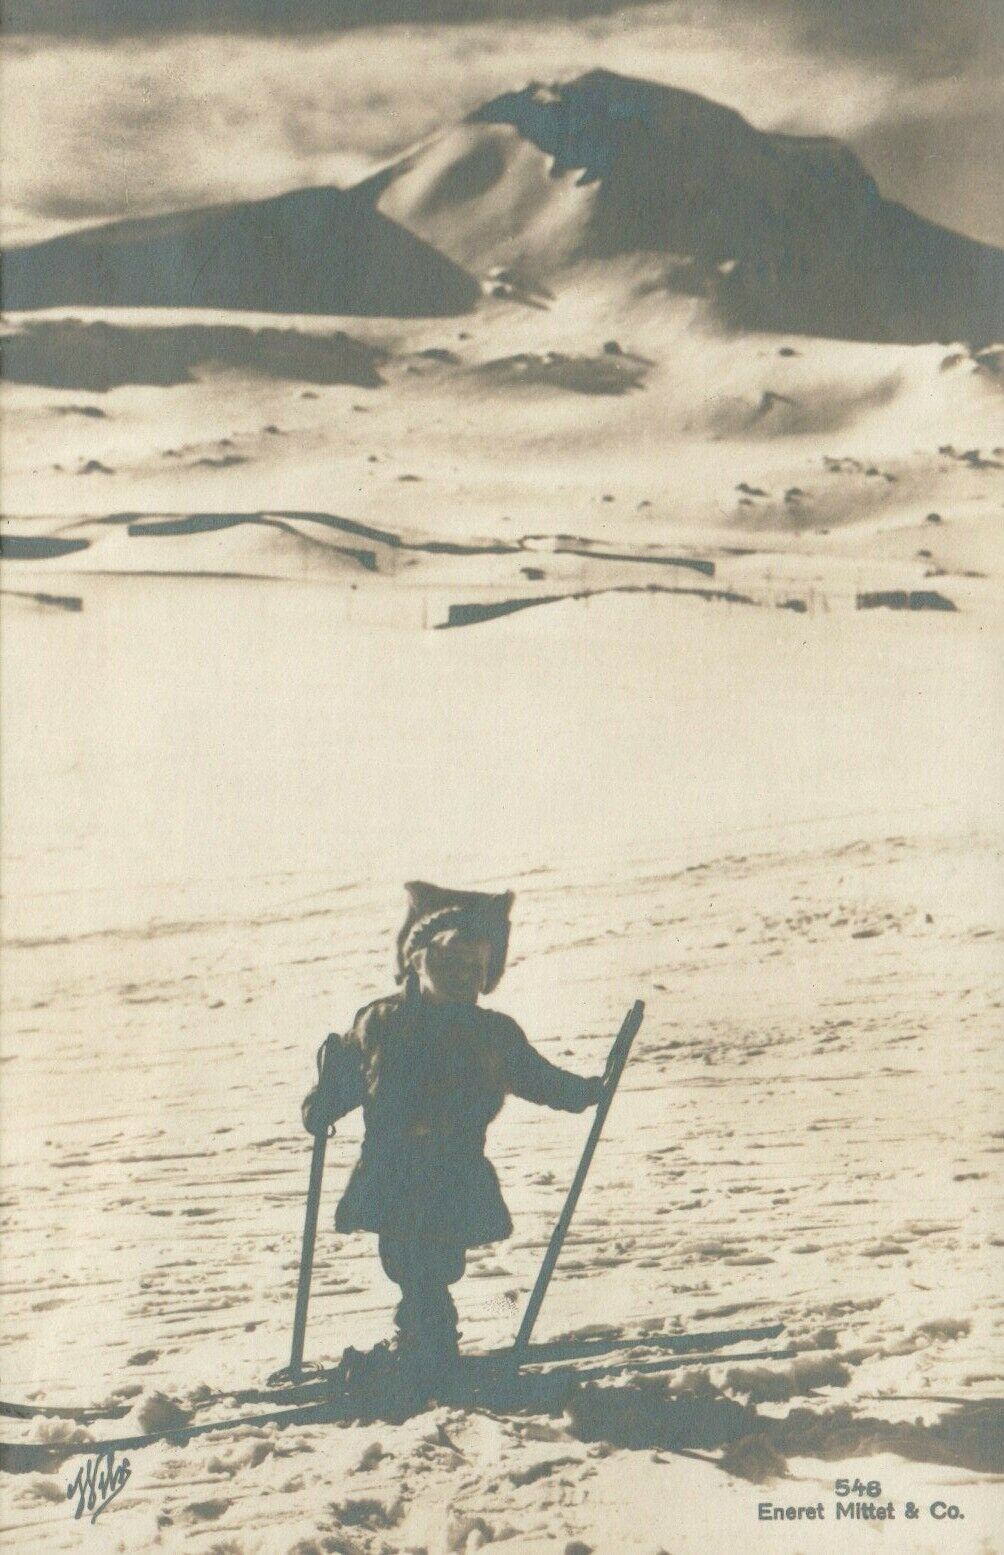 Vintage Snowy Mountains Young Skier Eneret Mittet & Co RPPC Real Photo Poster painting Postcard